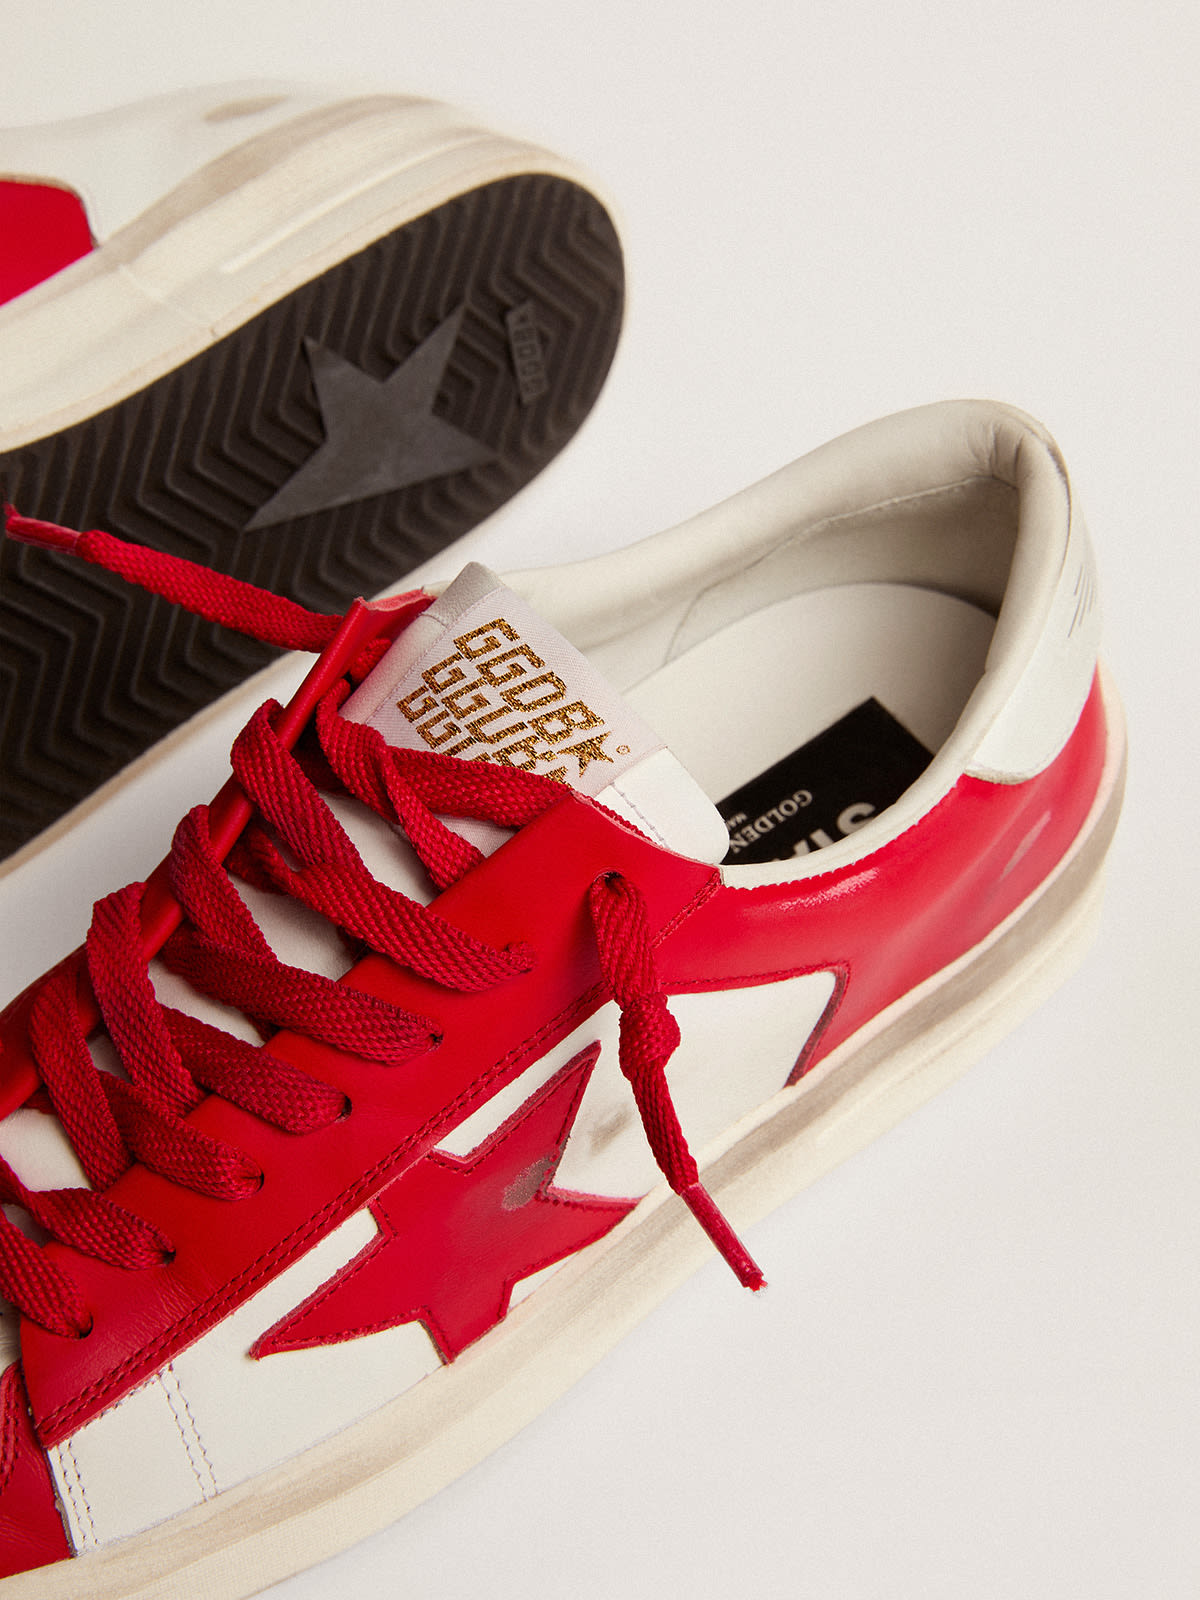 Golden Goose - Women's Stardan in white and red leather in 